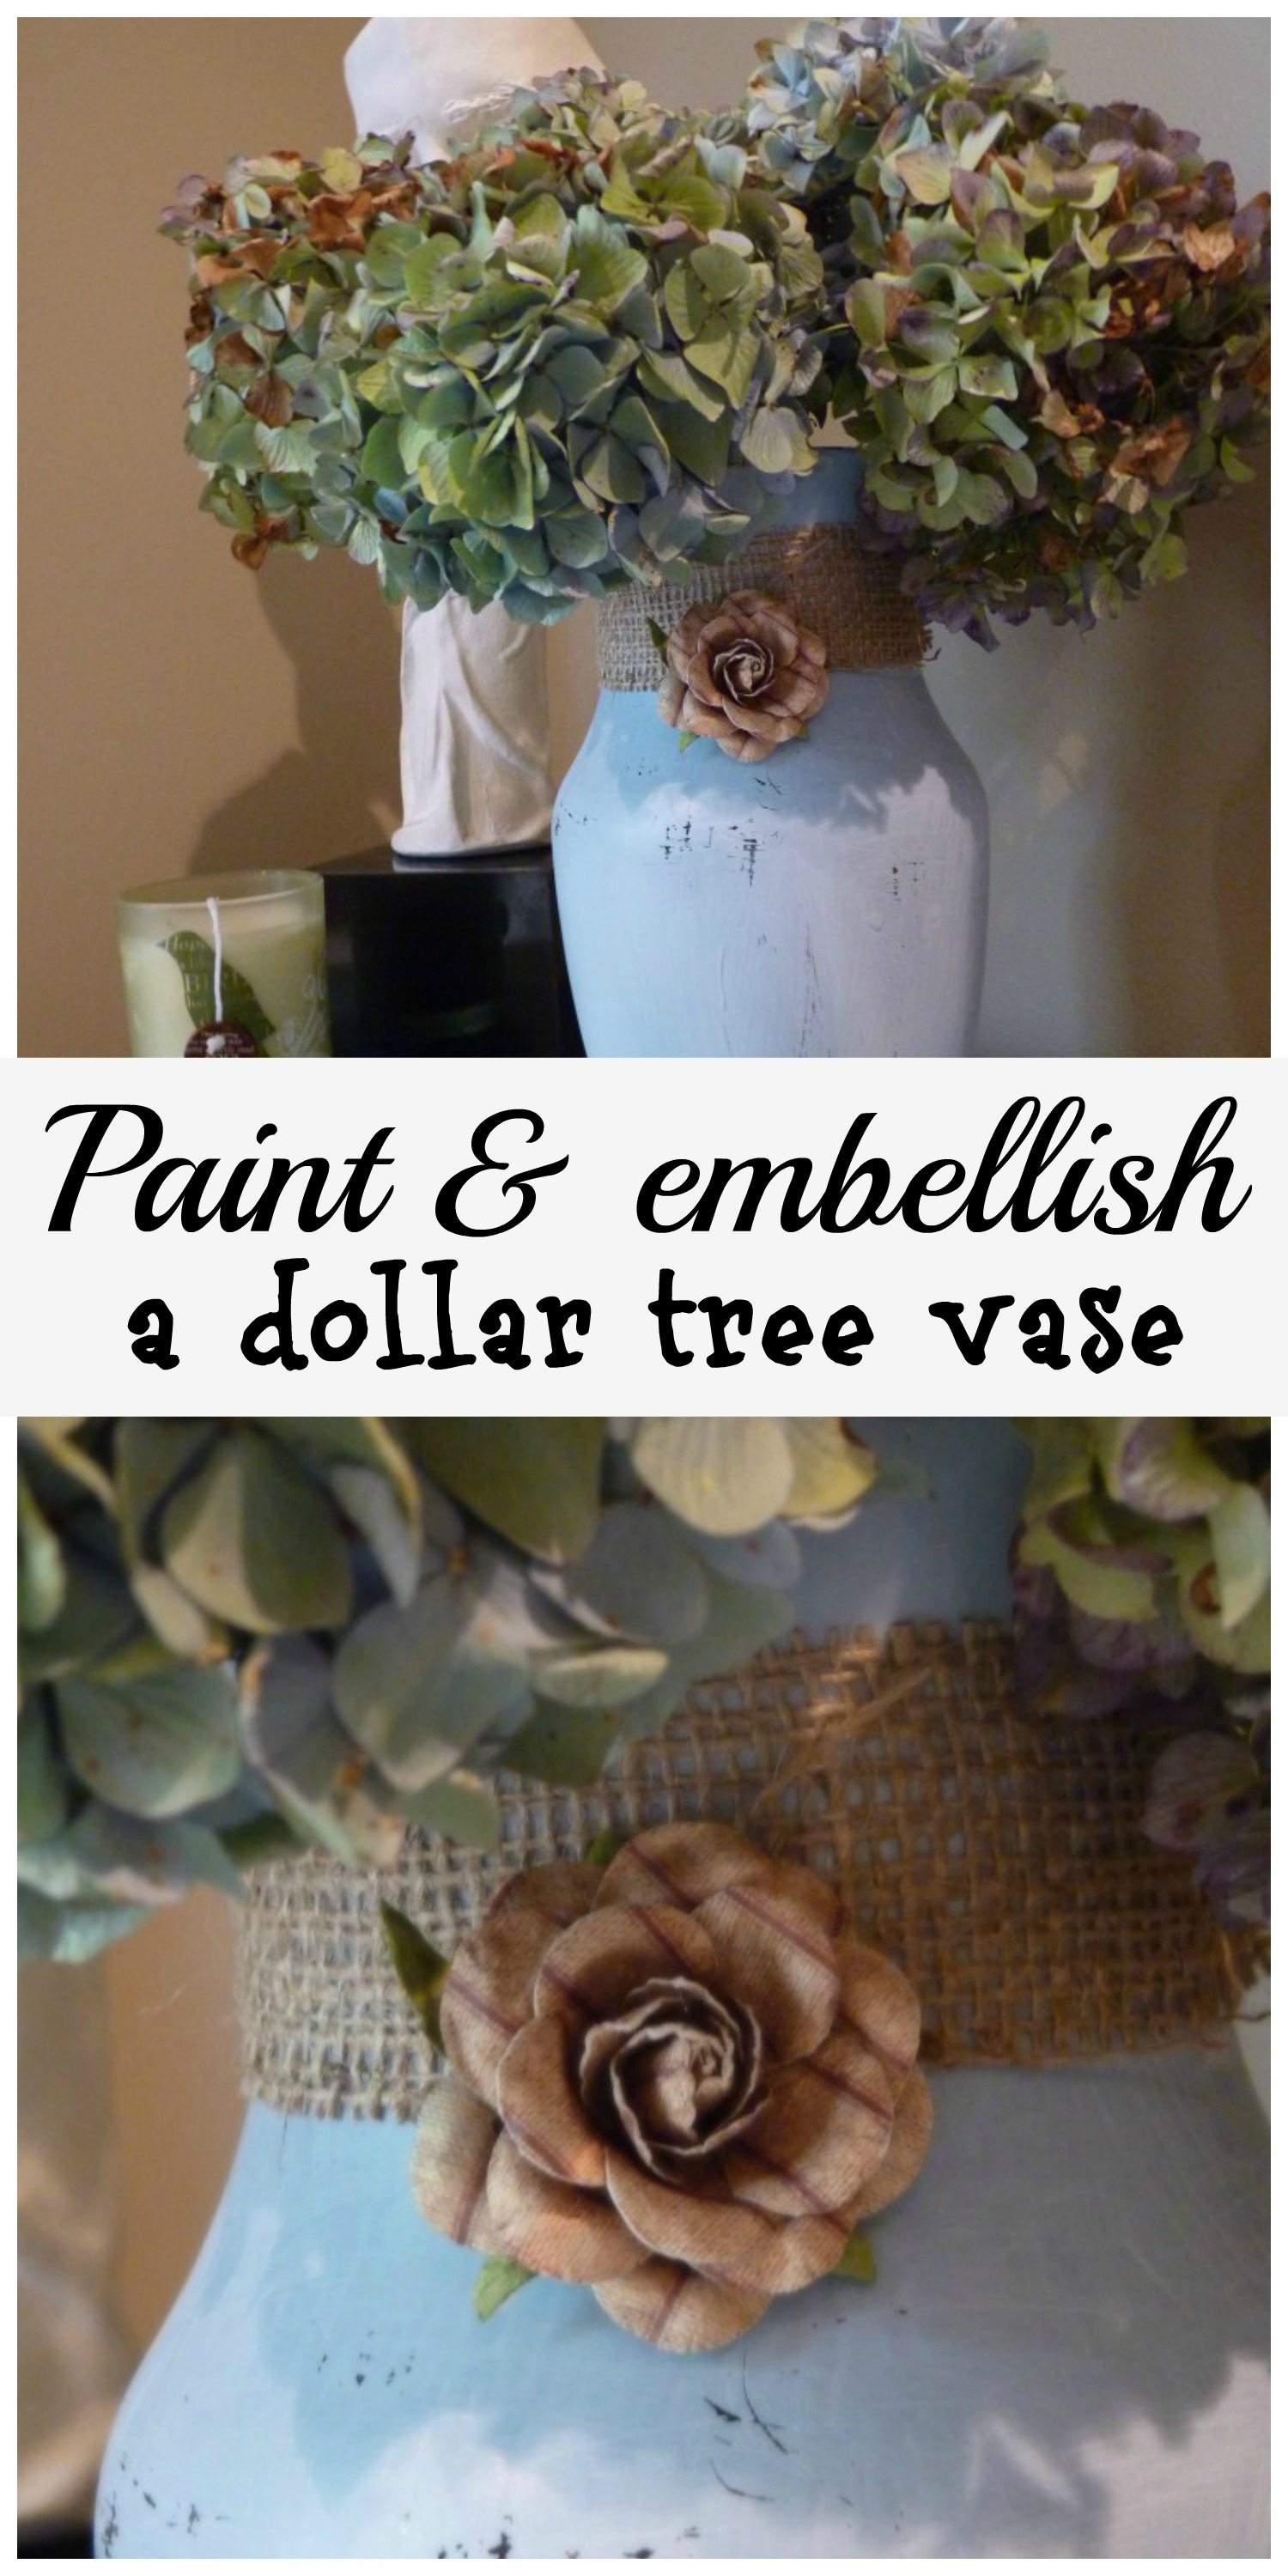 Painted vase from dollar tree, embellished with burlap